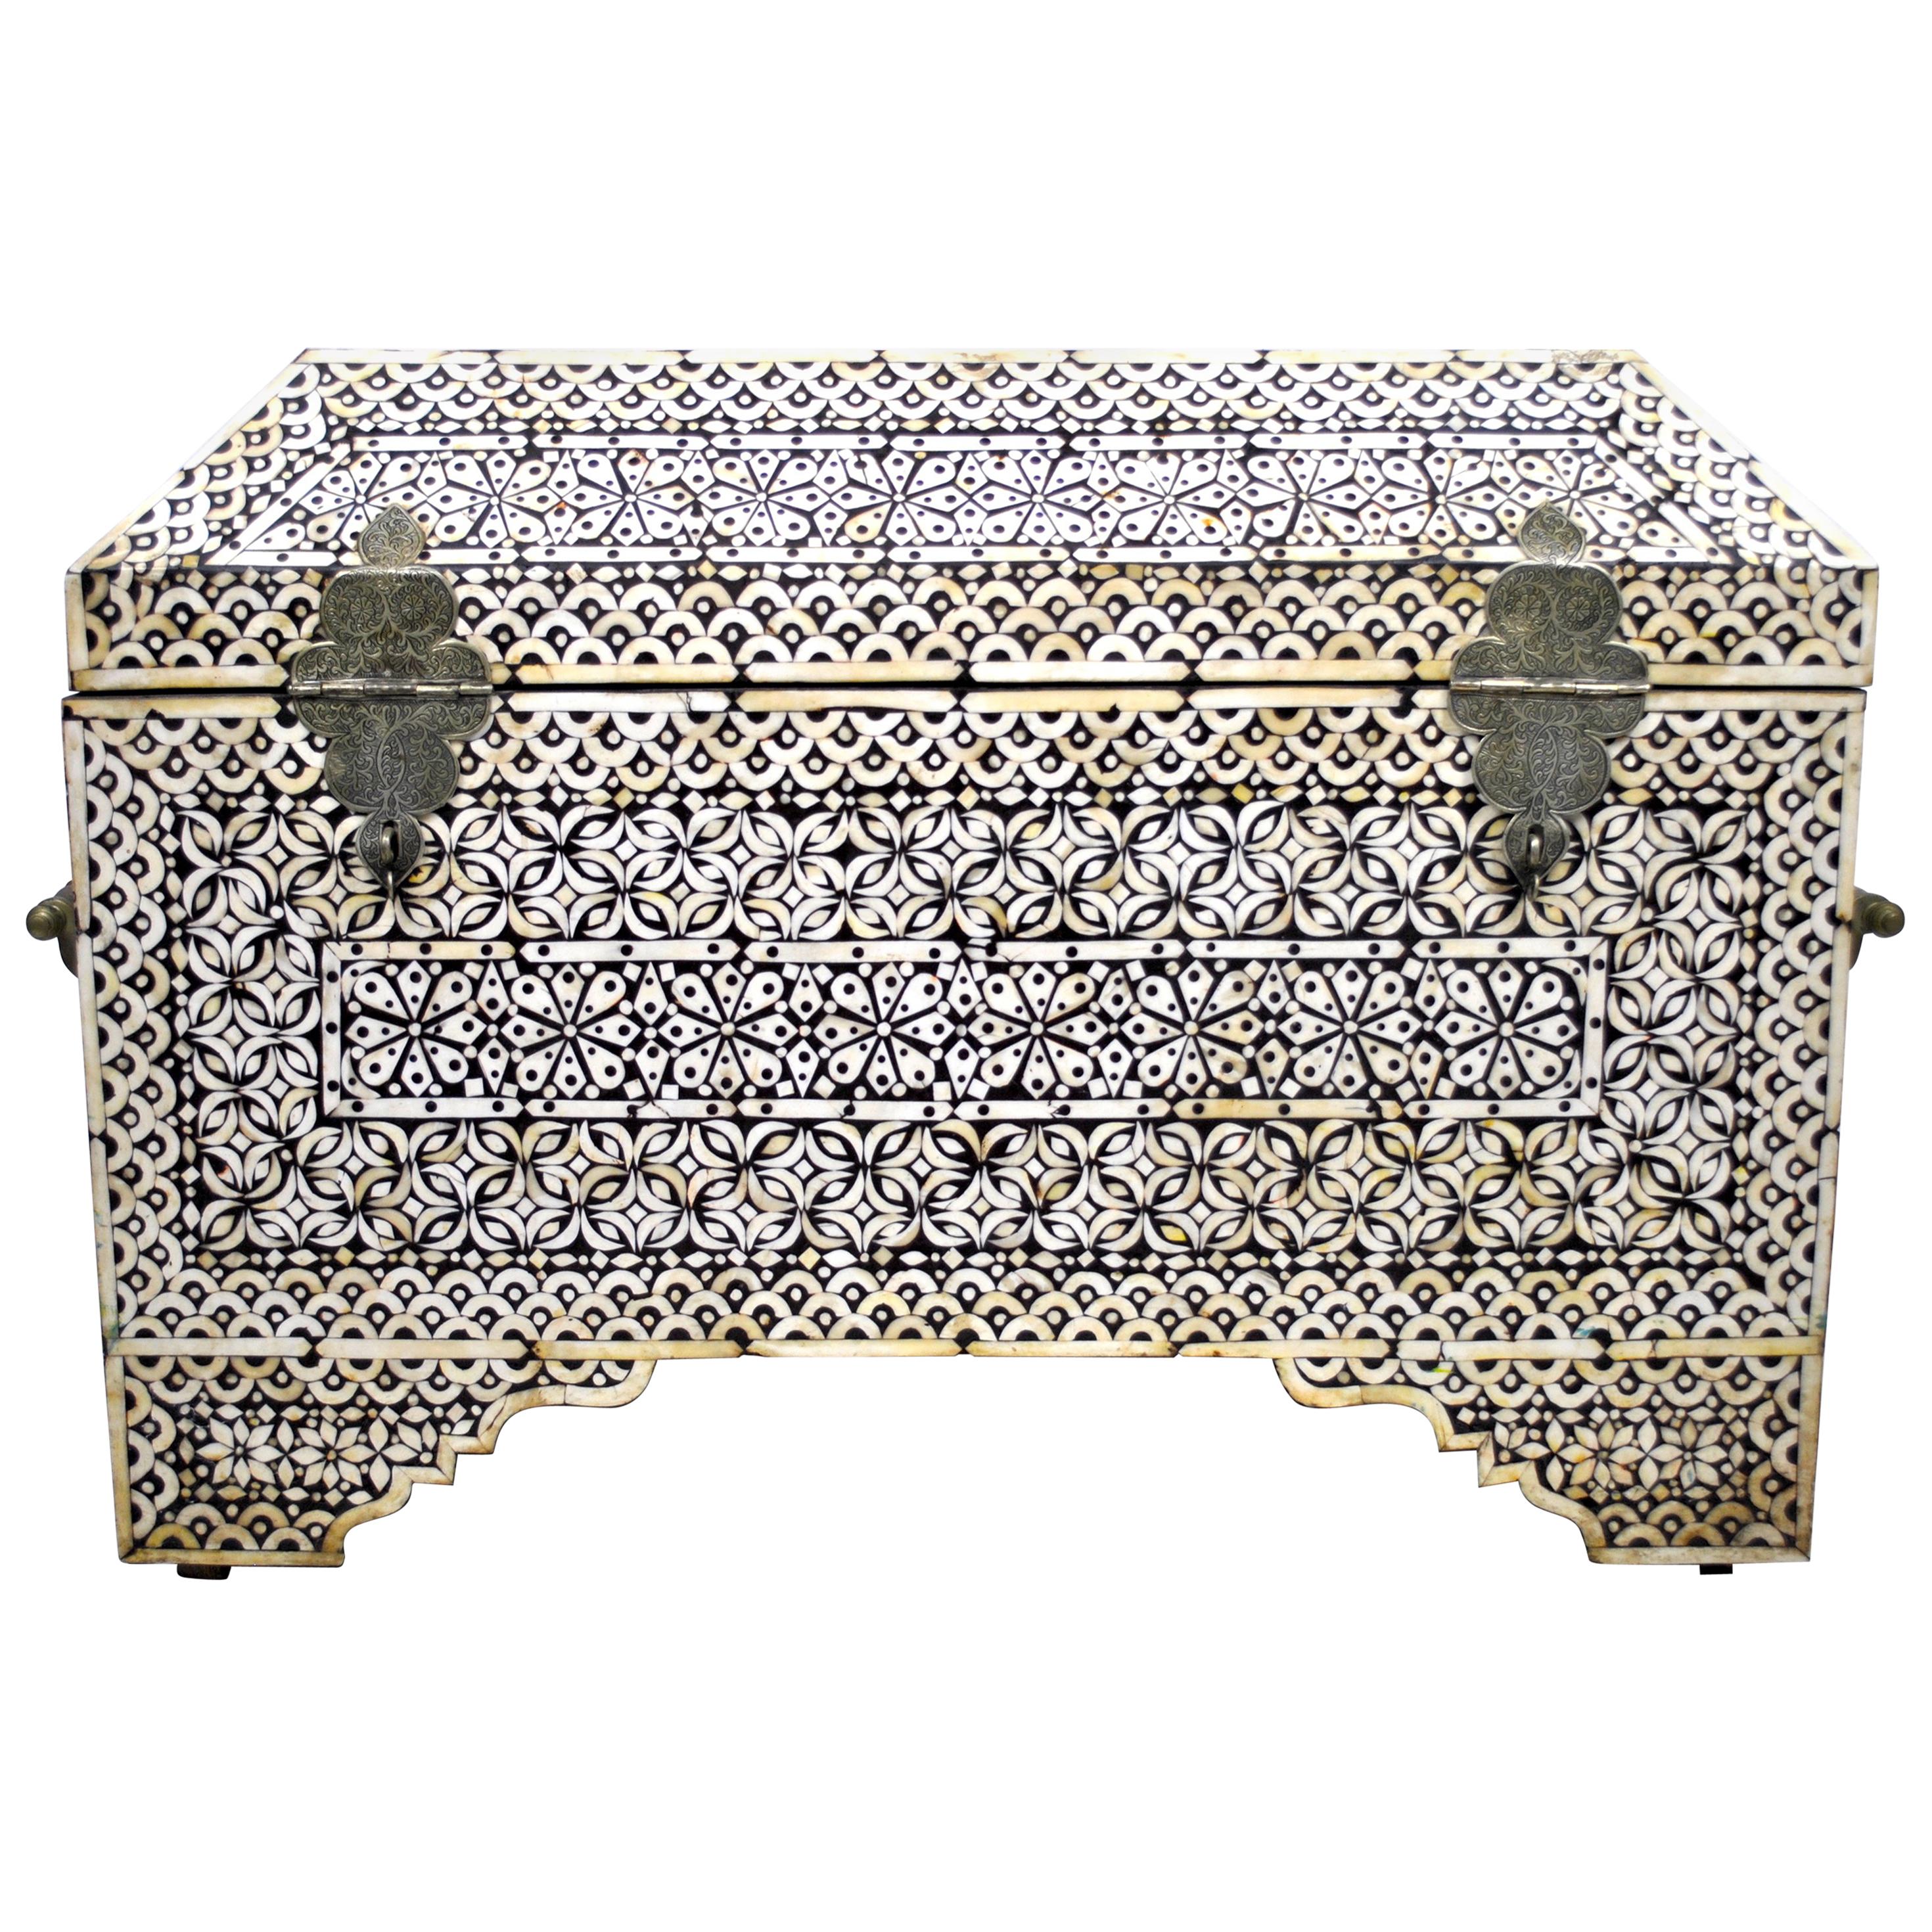 Large 19th Century Ebony and Bone Inlay Chest by Classic Silvercrats India